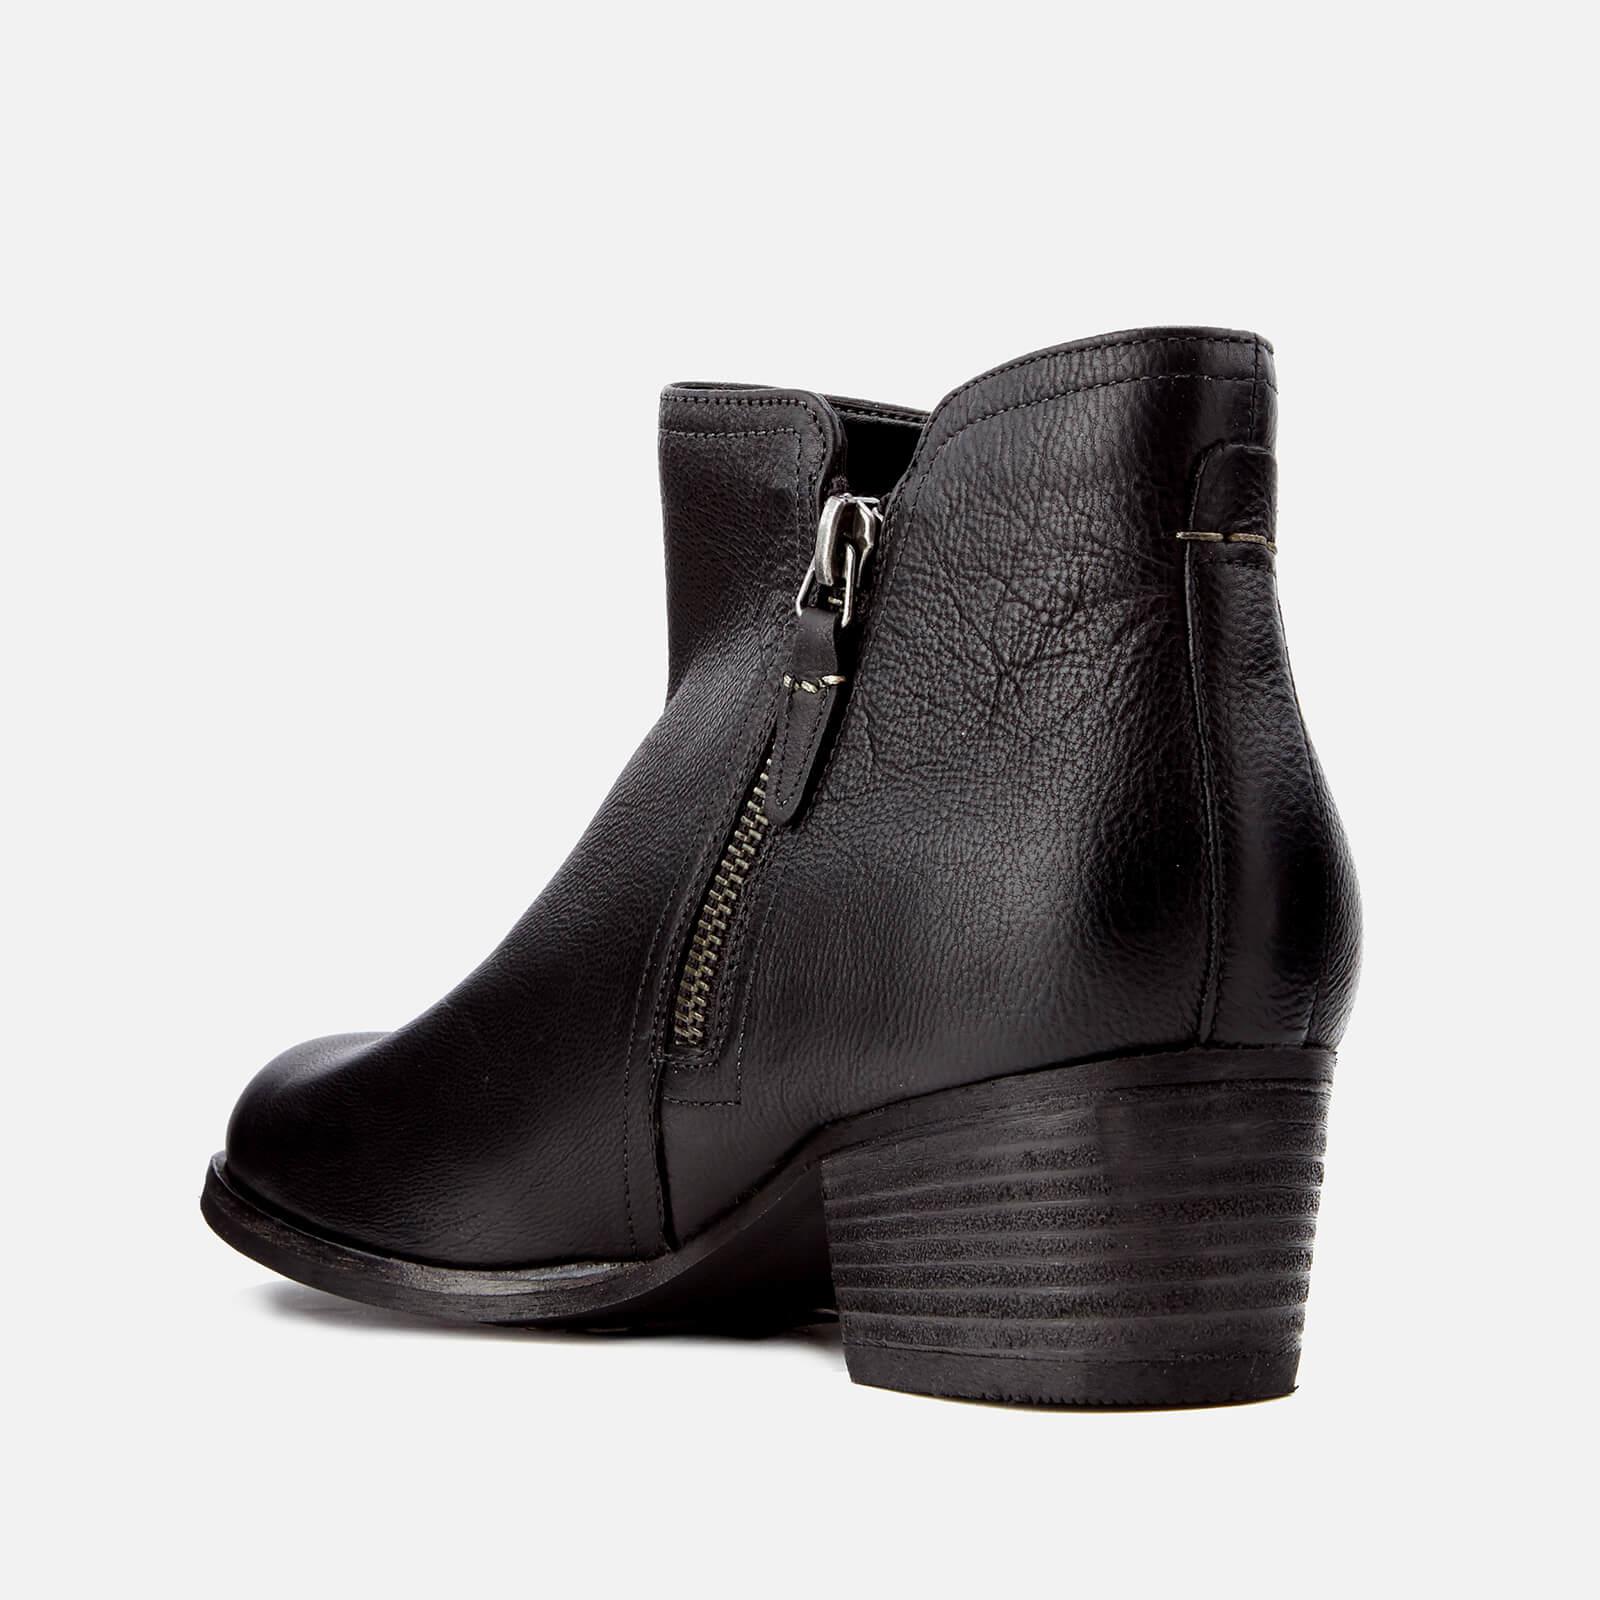 Clarks Women's Maypearl Ramie Leather Ankle Boots in Black | Lyst